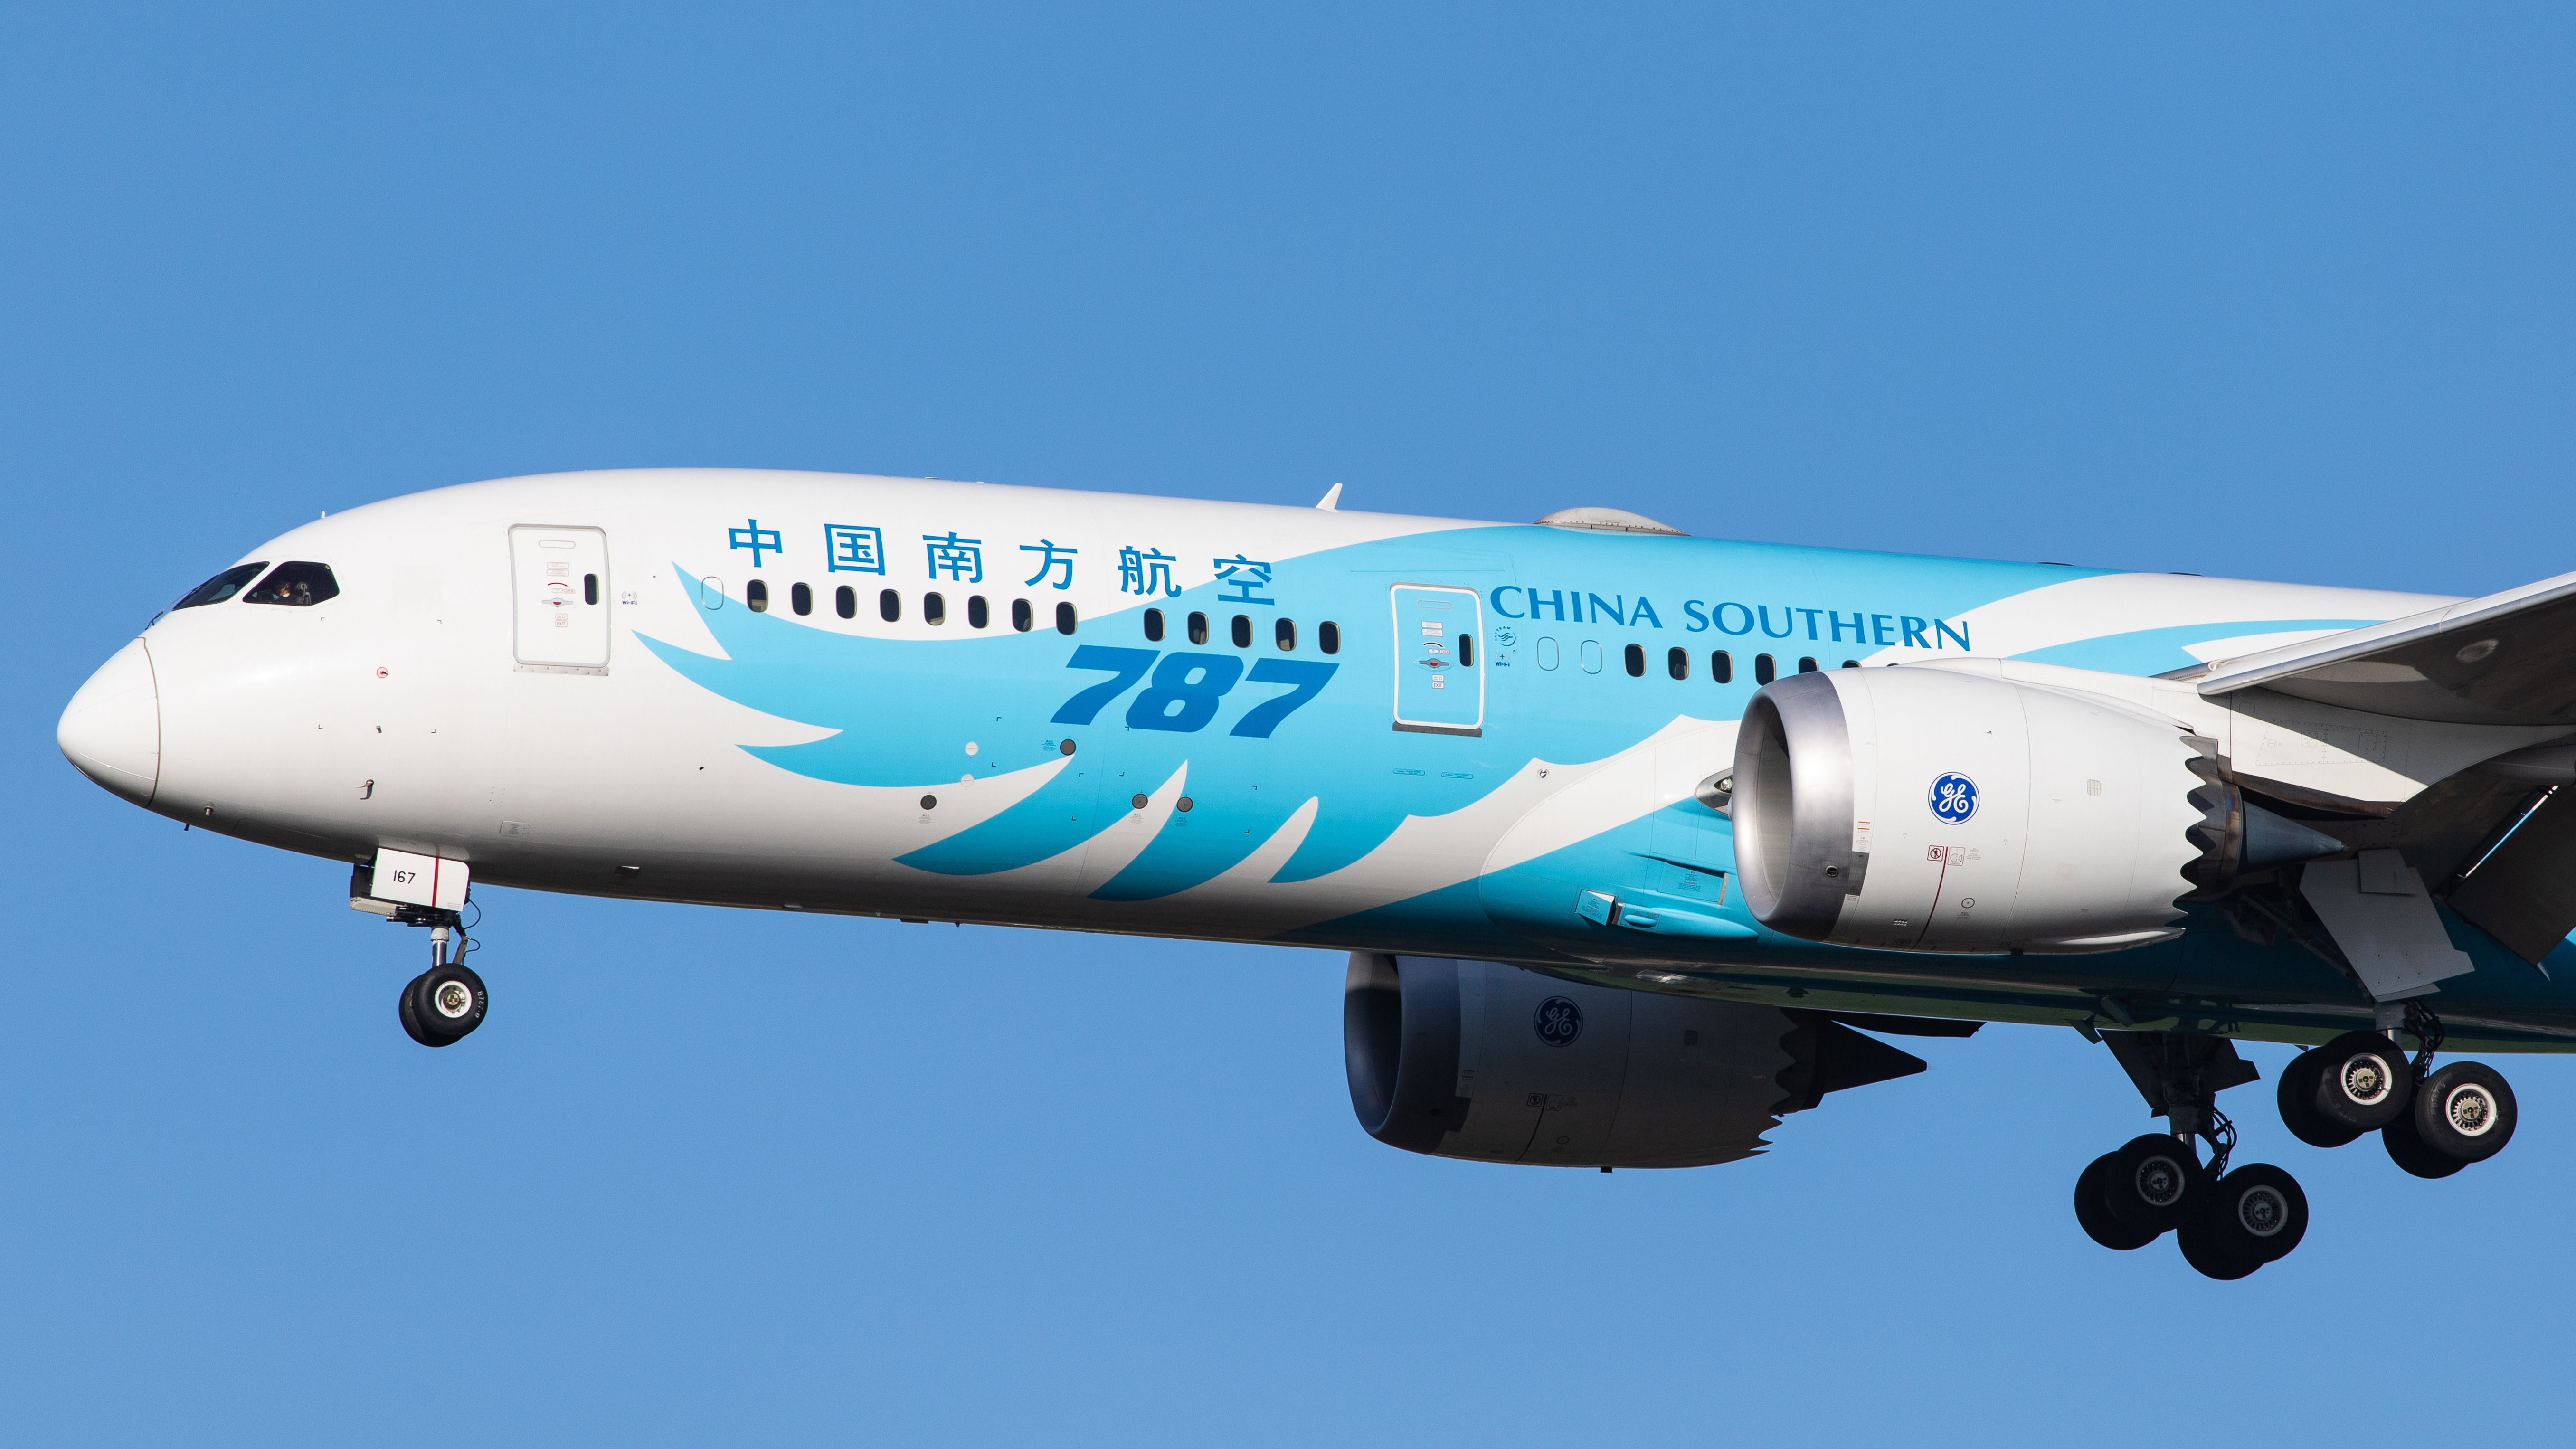 A China Southern Airlines Boeing 787 taking off